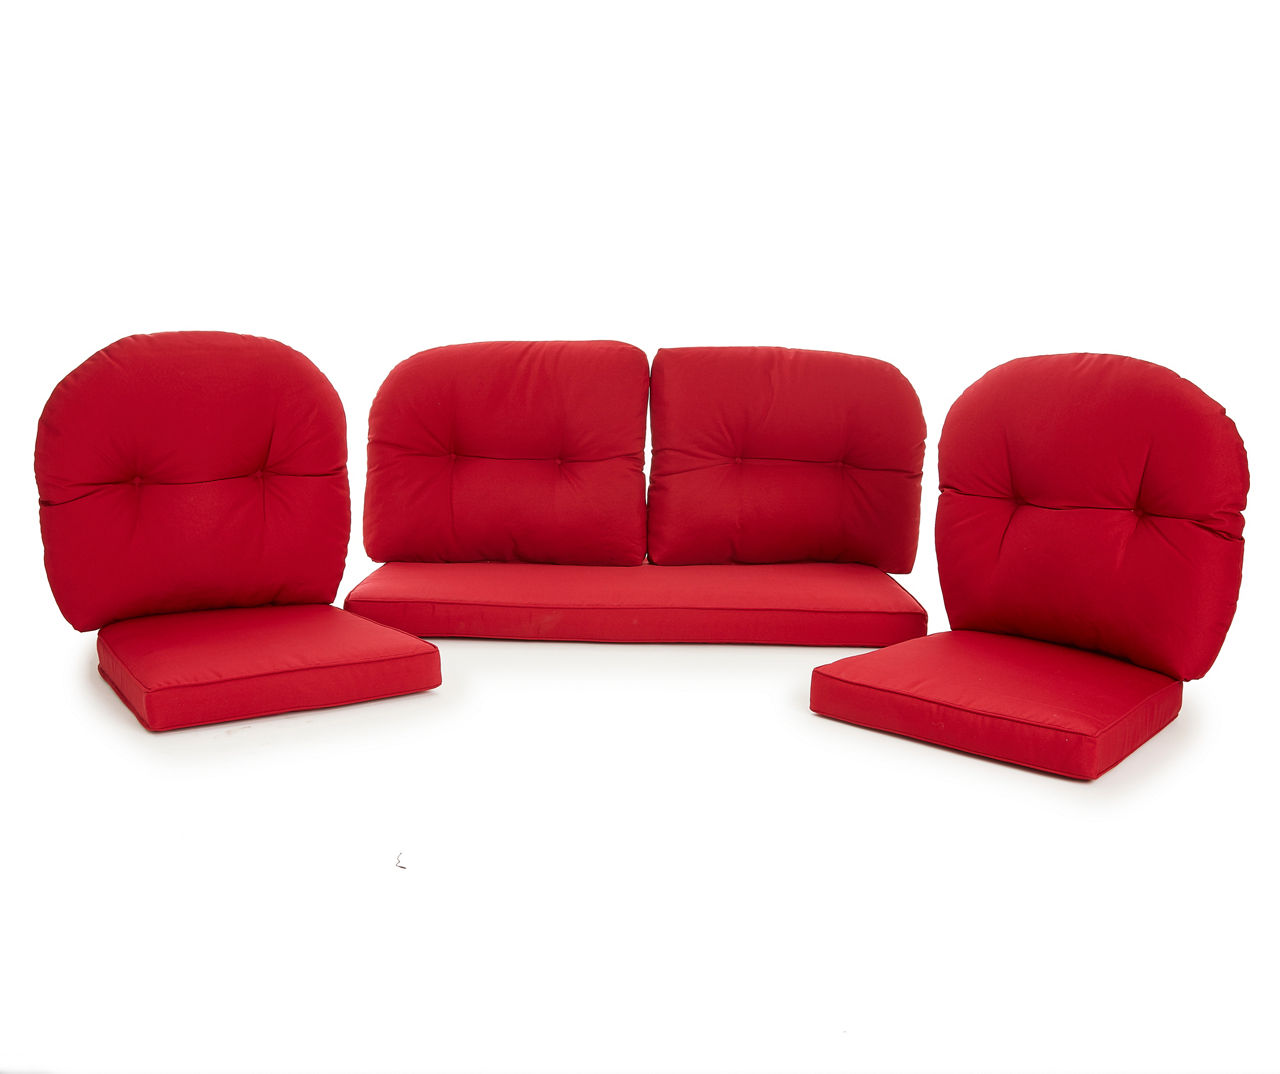 RED 7 PC REPLACEMENT CUSHION SET